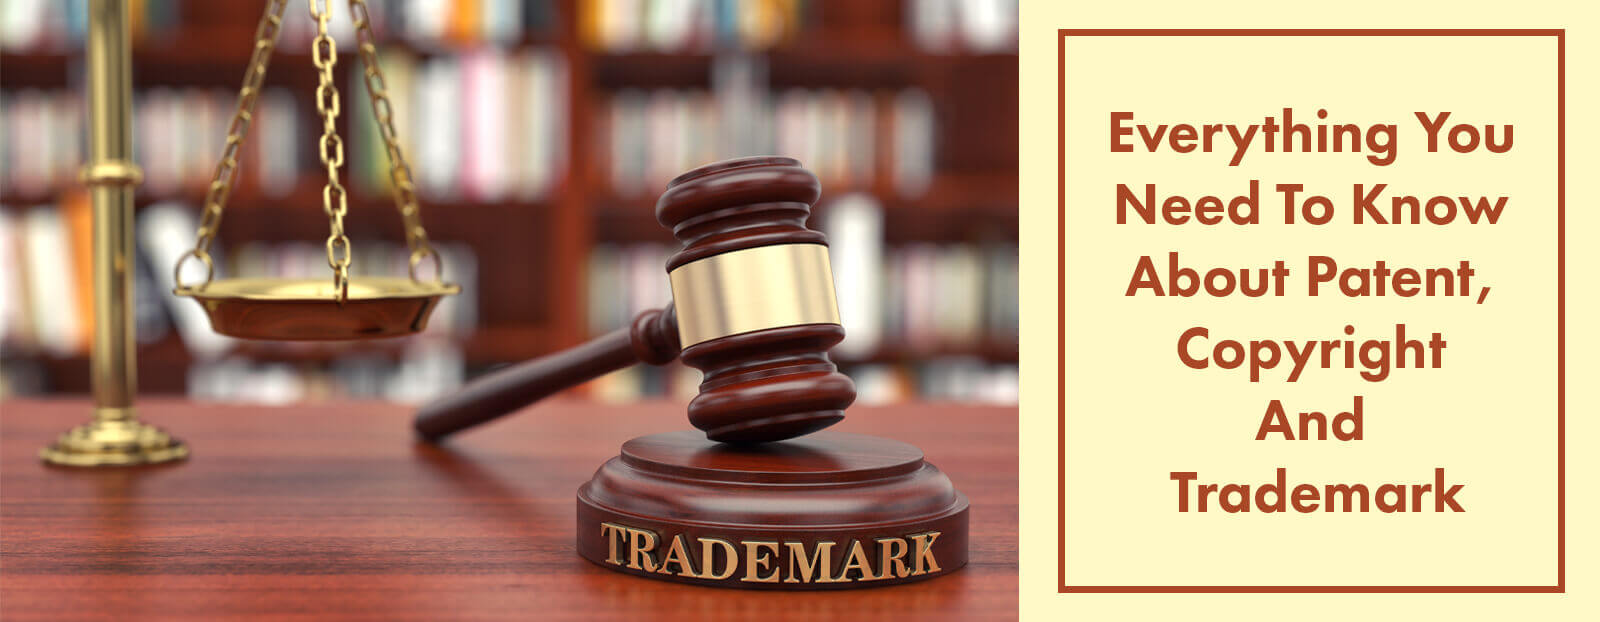 Everything You Need To Know About Patent, Copyright And Trademark